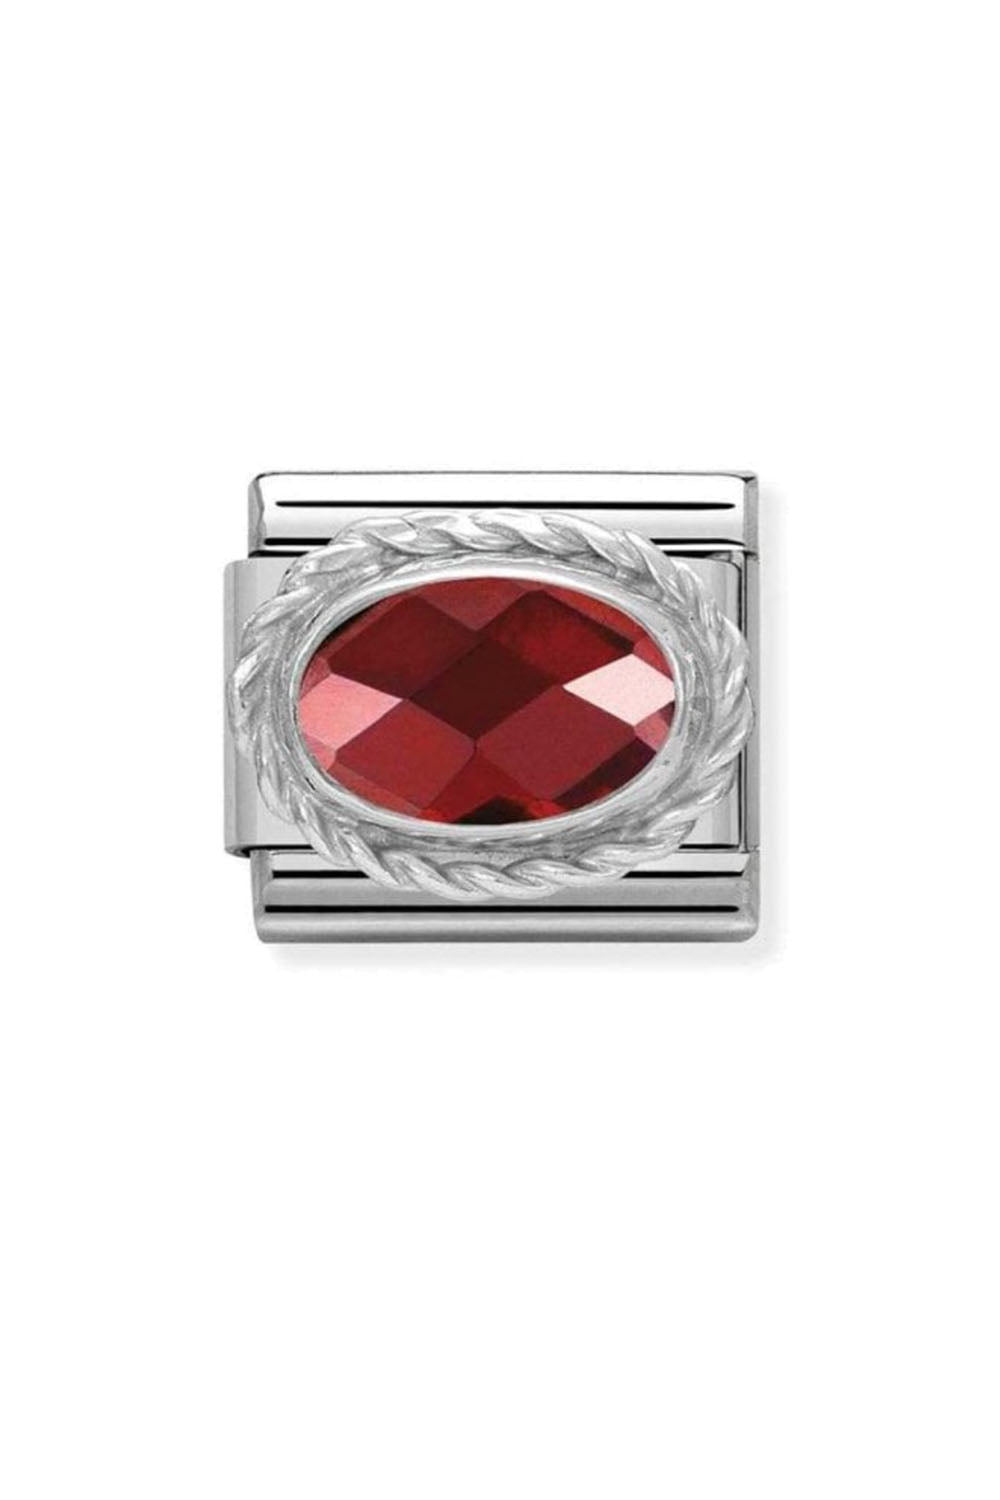 CZ faceted with 925 sterling silver setting and CZ Red